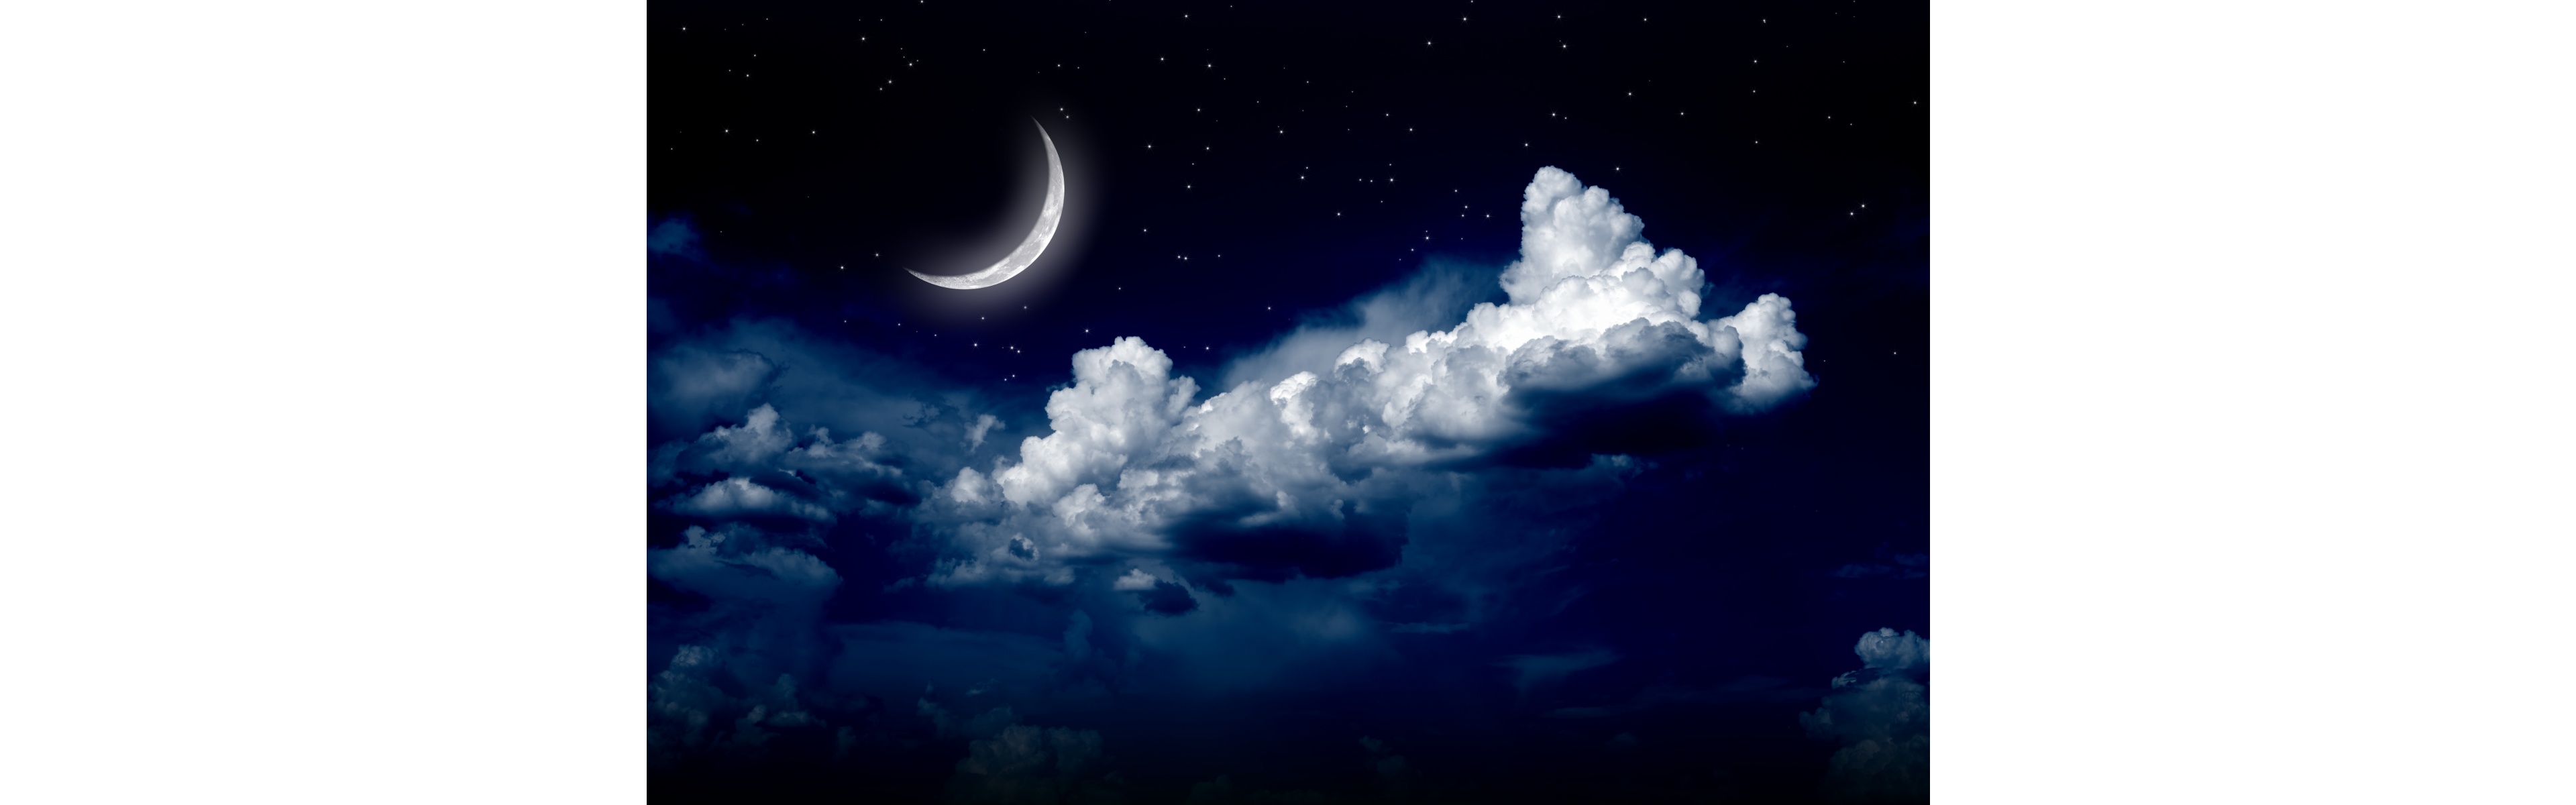 Selected Resoloution Fantasy Night Moon Clouds Size